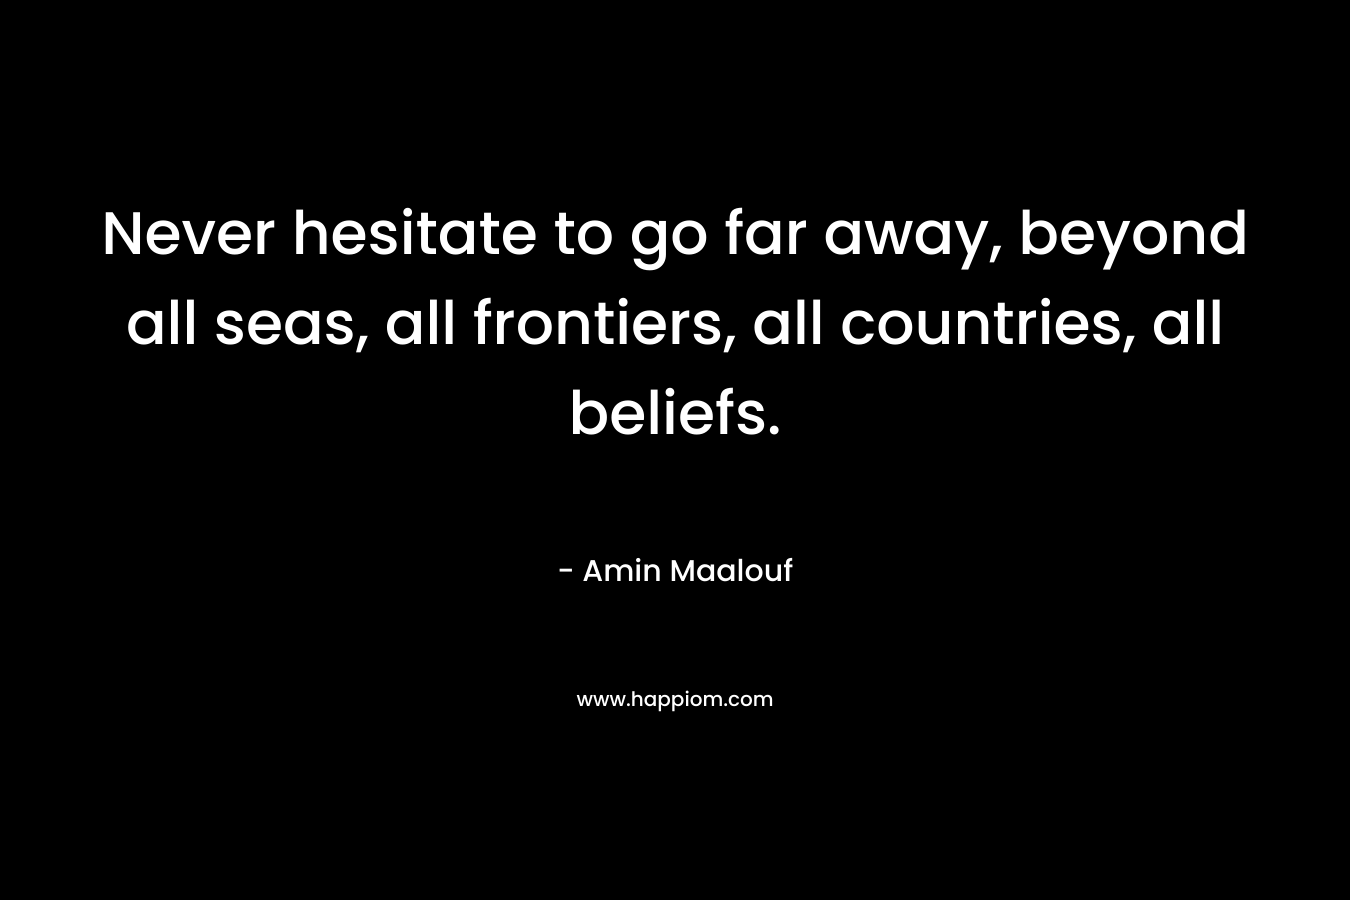 Never hesitate to go far away, beyond all seas, all frontiers, all countries, all beliefs.